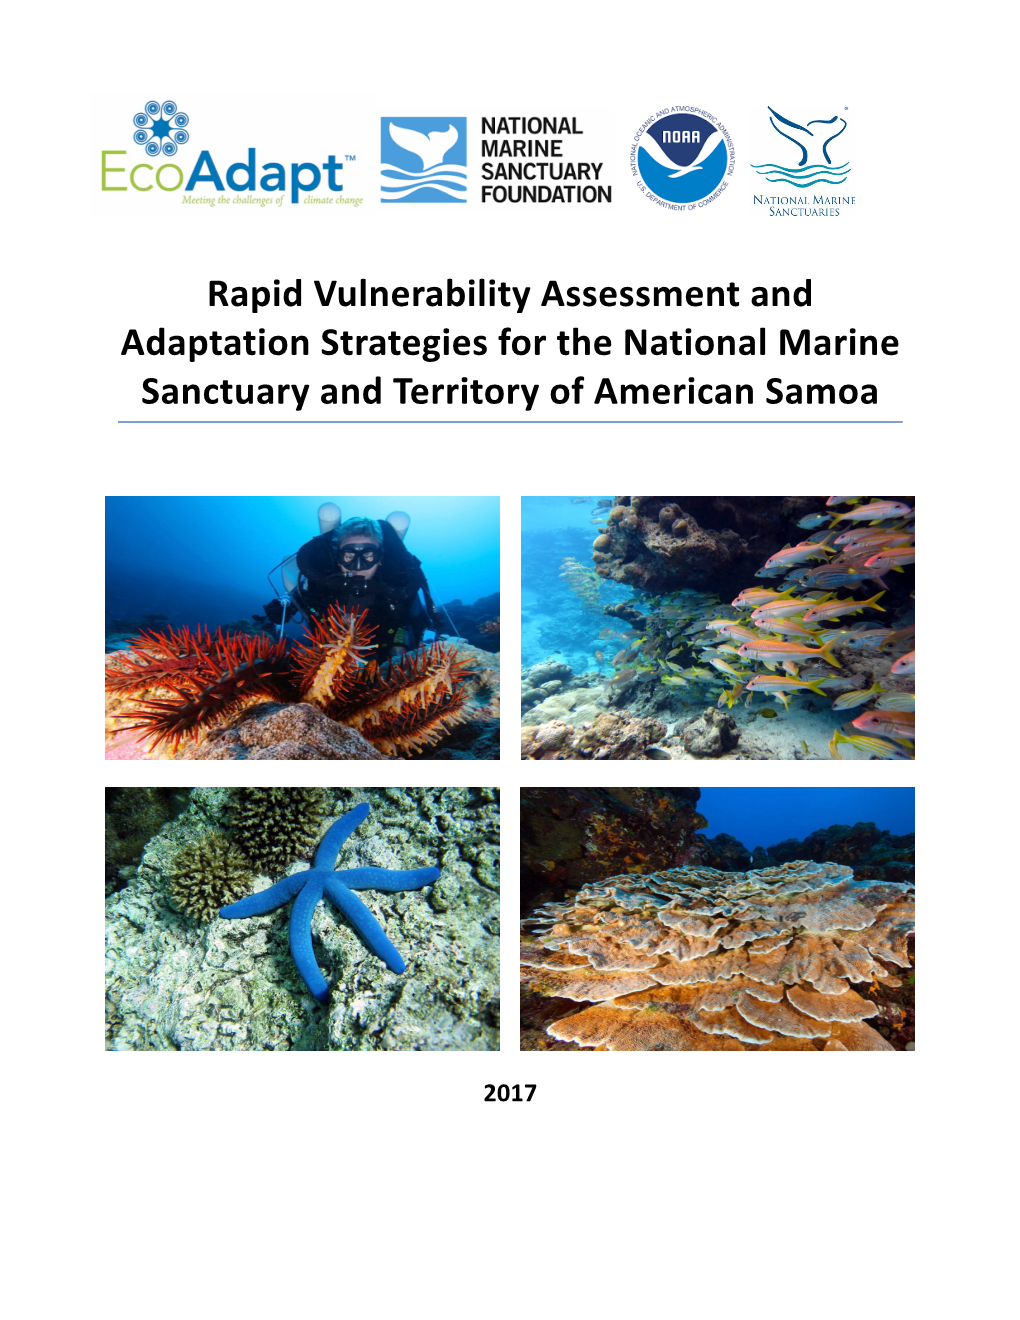 Rapid Vulnerability Assessment and Adaptation Strategies for the National Marine Sanctuary and Territory of American Samoa